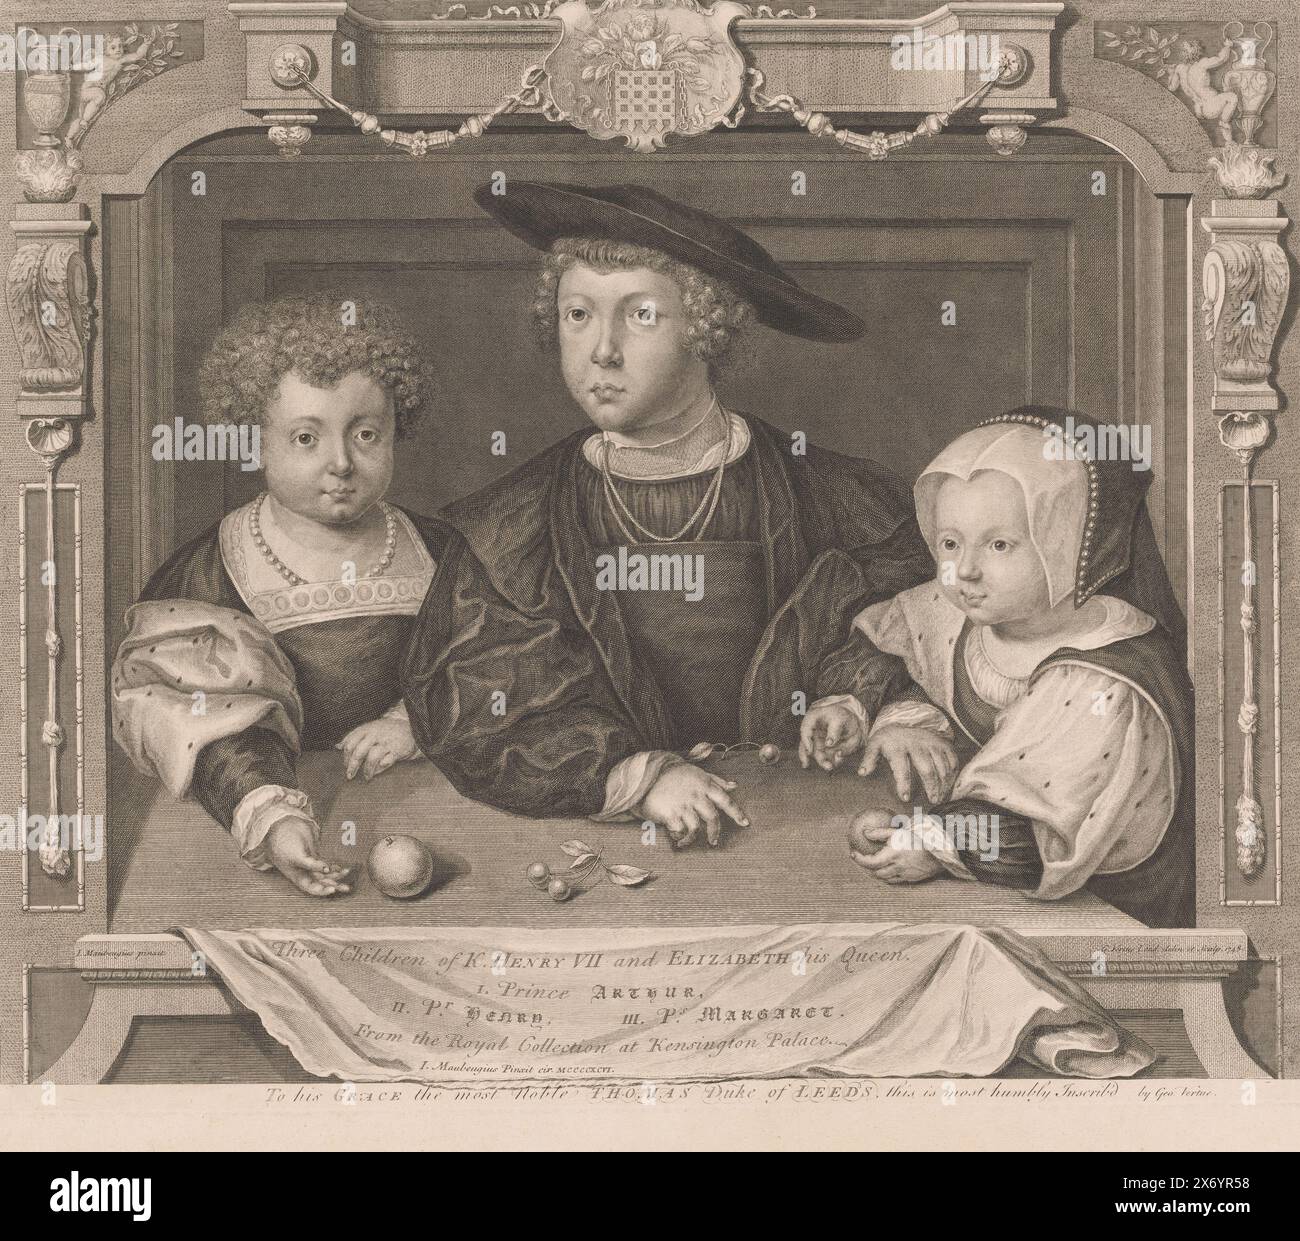 Portrait of Dorothea, Johan and Christina of Denmark, Three Children of K. Henry VII and Elizabeth his Queen. I. Prince Arthur, II. Pr. Henry, III. Ps. Margaret (title on object), Portraits of the Tudors (series title), Historical Portraitures (series title), Portrait of the three children of Christian II of Denmark., print, print maker: George Vertue, (mentioned on object), after own design by: George Vertue, (mentioned on object), after painting by: Jan Gossart, (mentioned on object), 1748, paper, etching, engraving, height, 473 mm × width, 568 mm Stock Photo